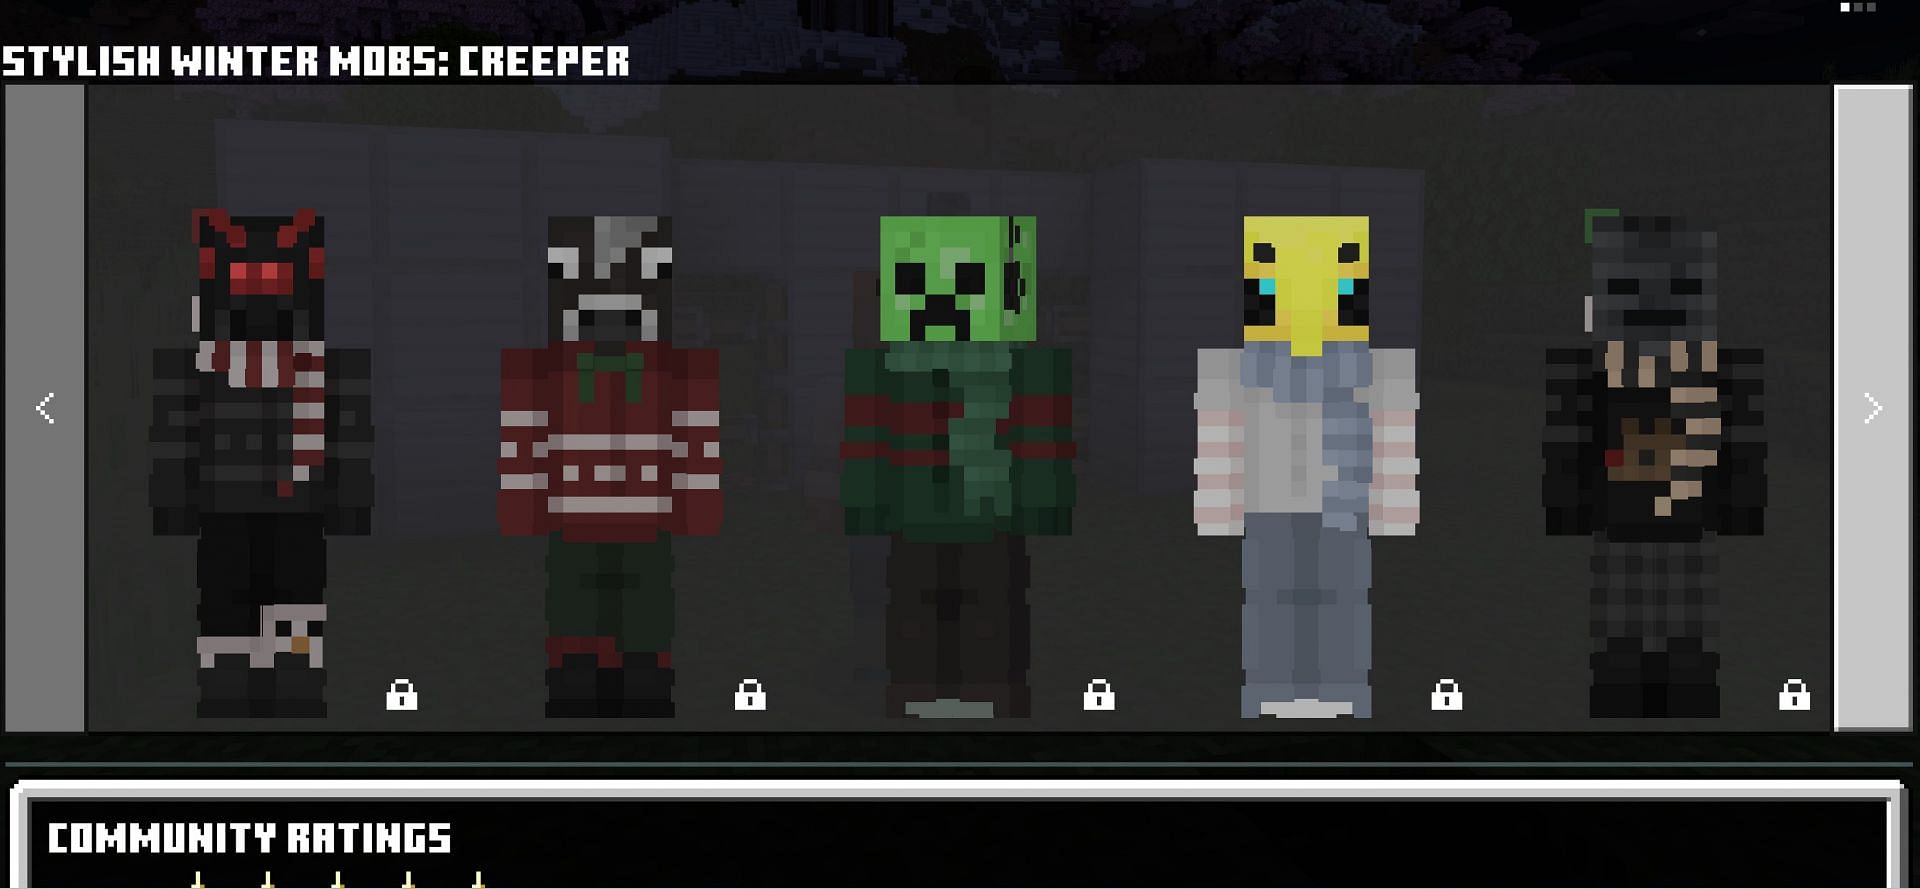 These skins are as cozy as they are adorable. (Image via Mojang)